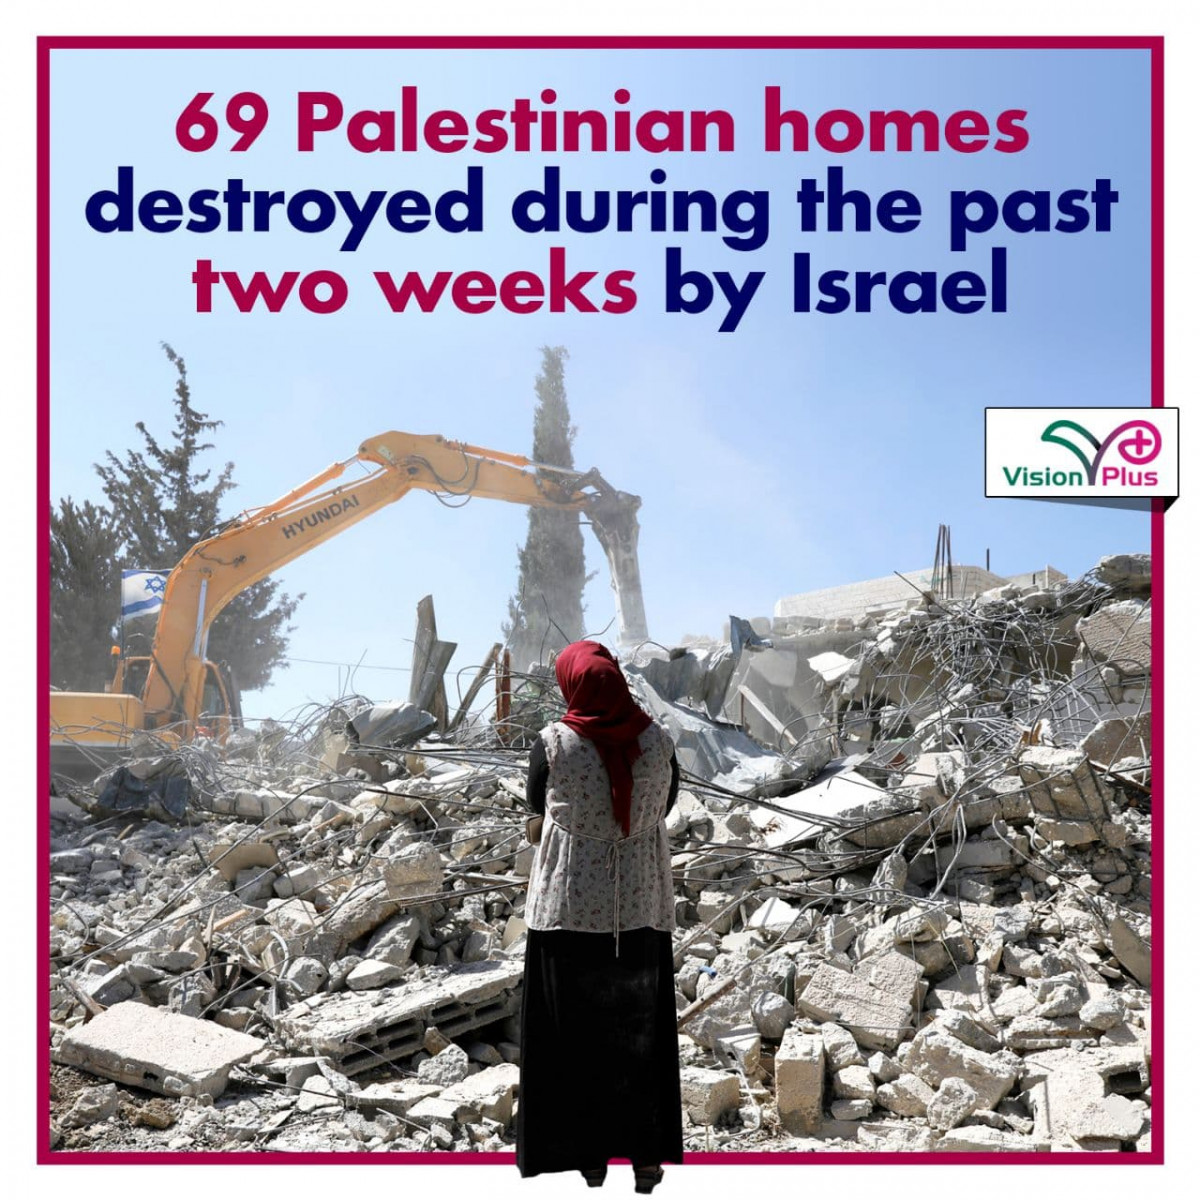 69 Palestinian homes destroyed during the past two weeks by Israel